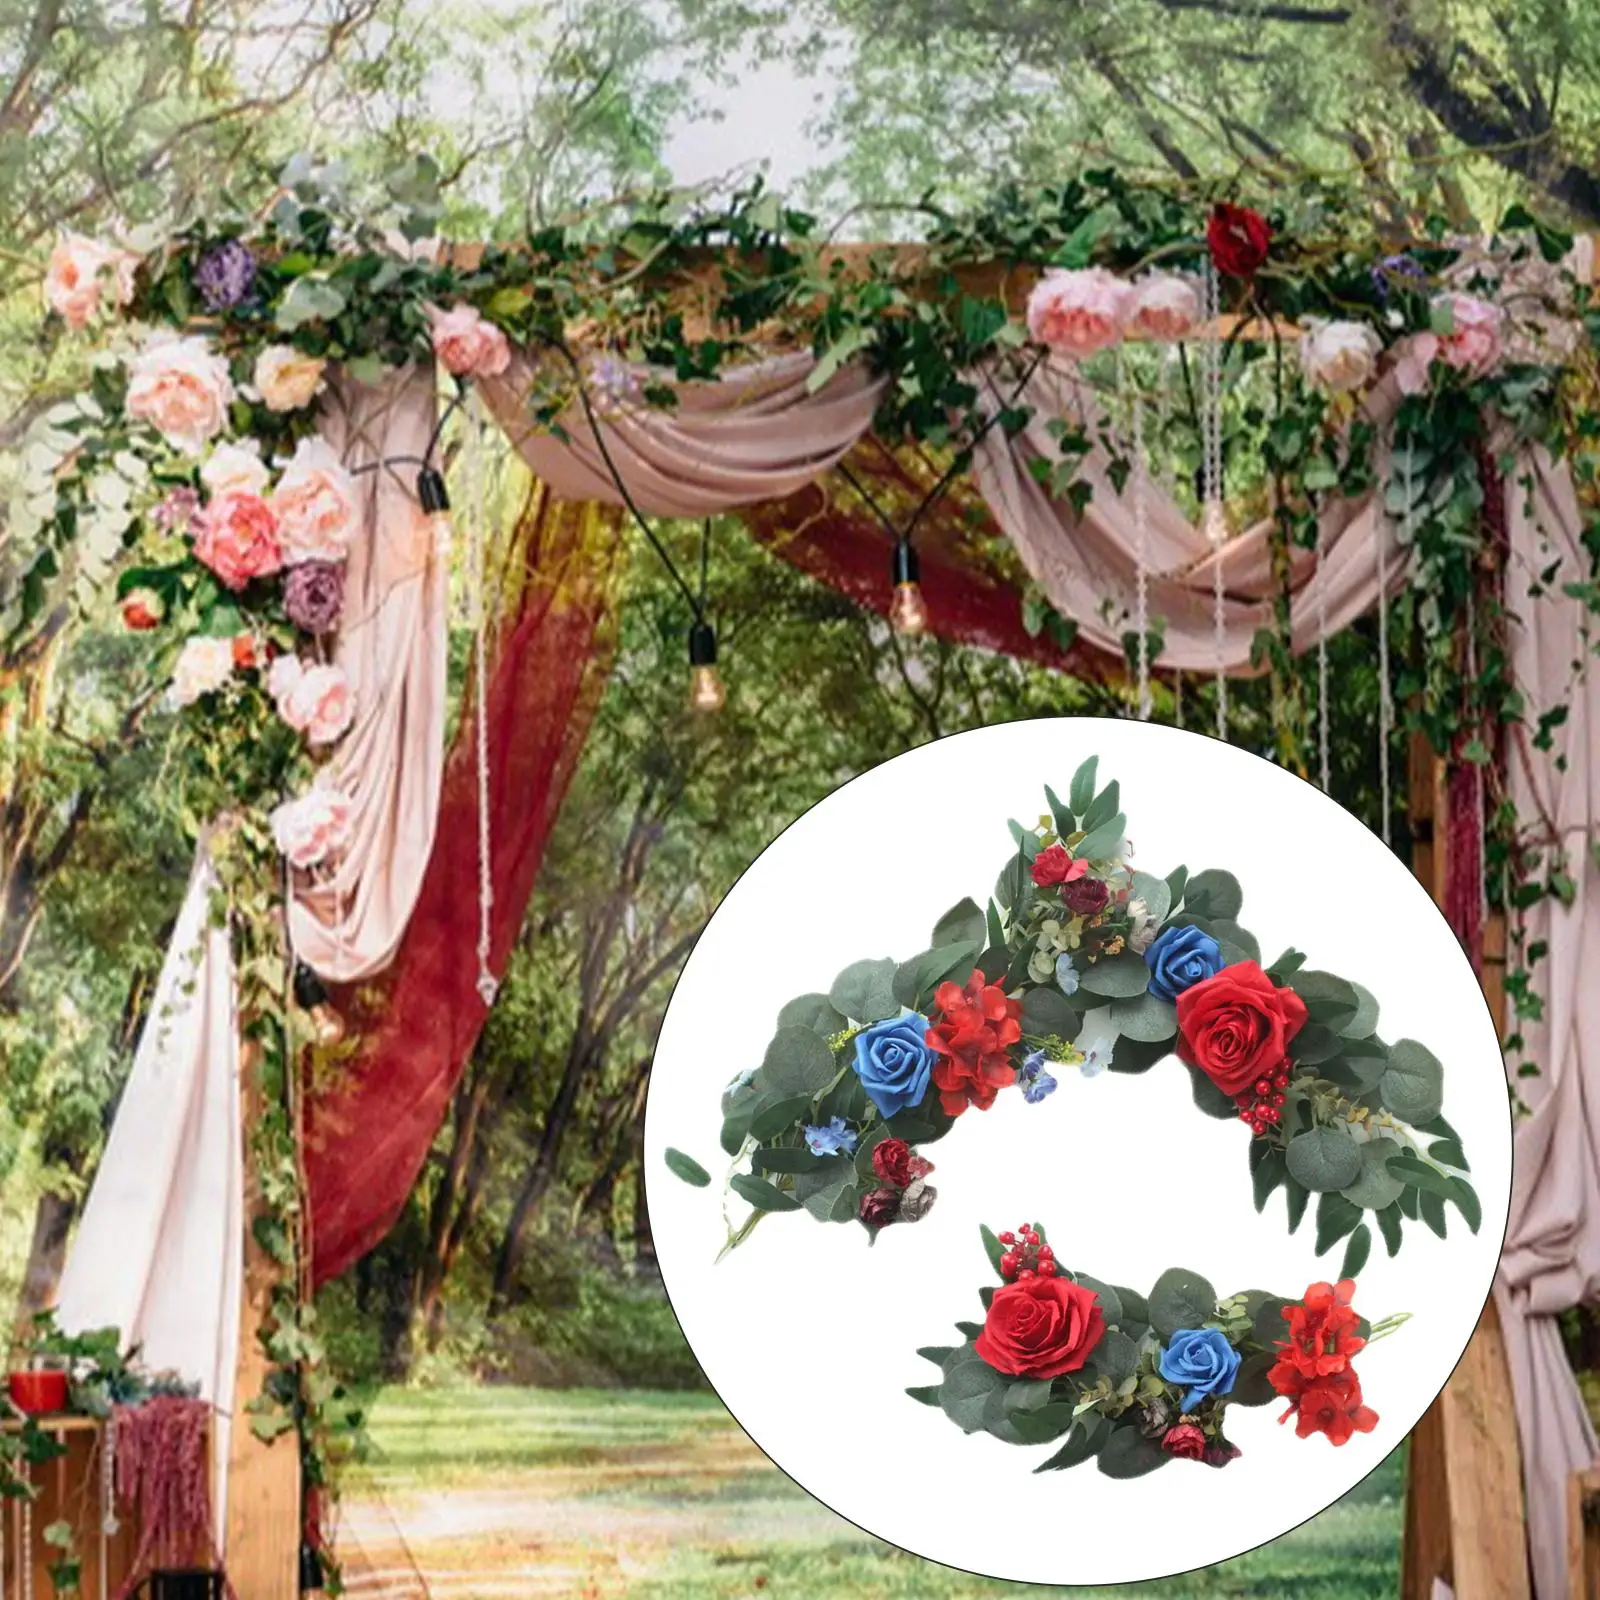 2Pcs Handmade Wedding Arch Flowers Kit Green Leaves Artificial Flowers for Ceremony Welcome Card Sign Corner Arch Decorations